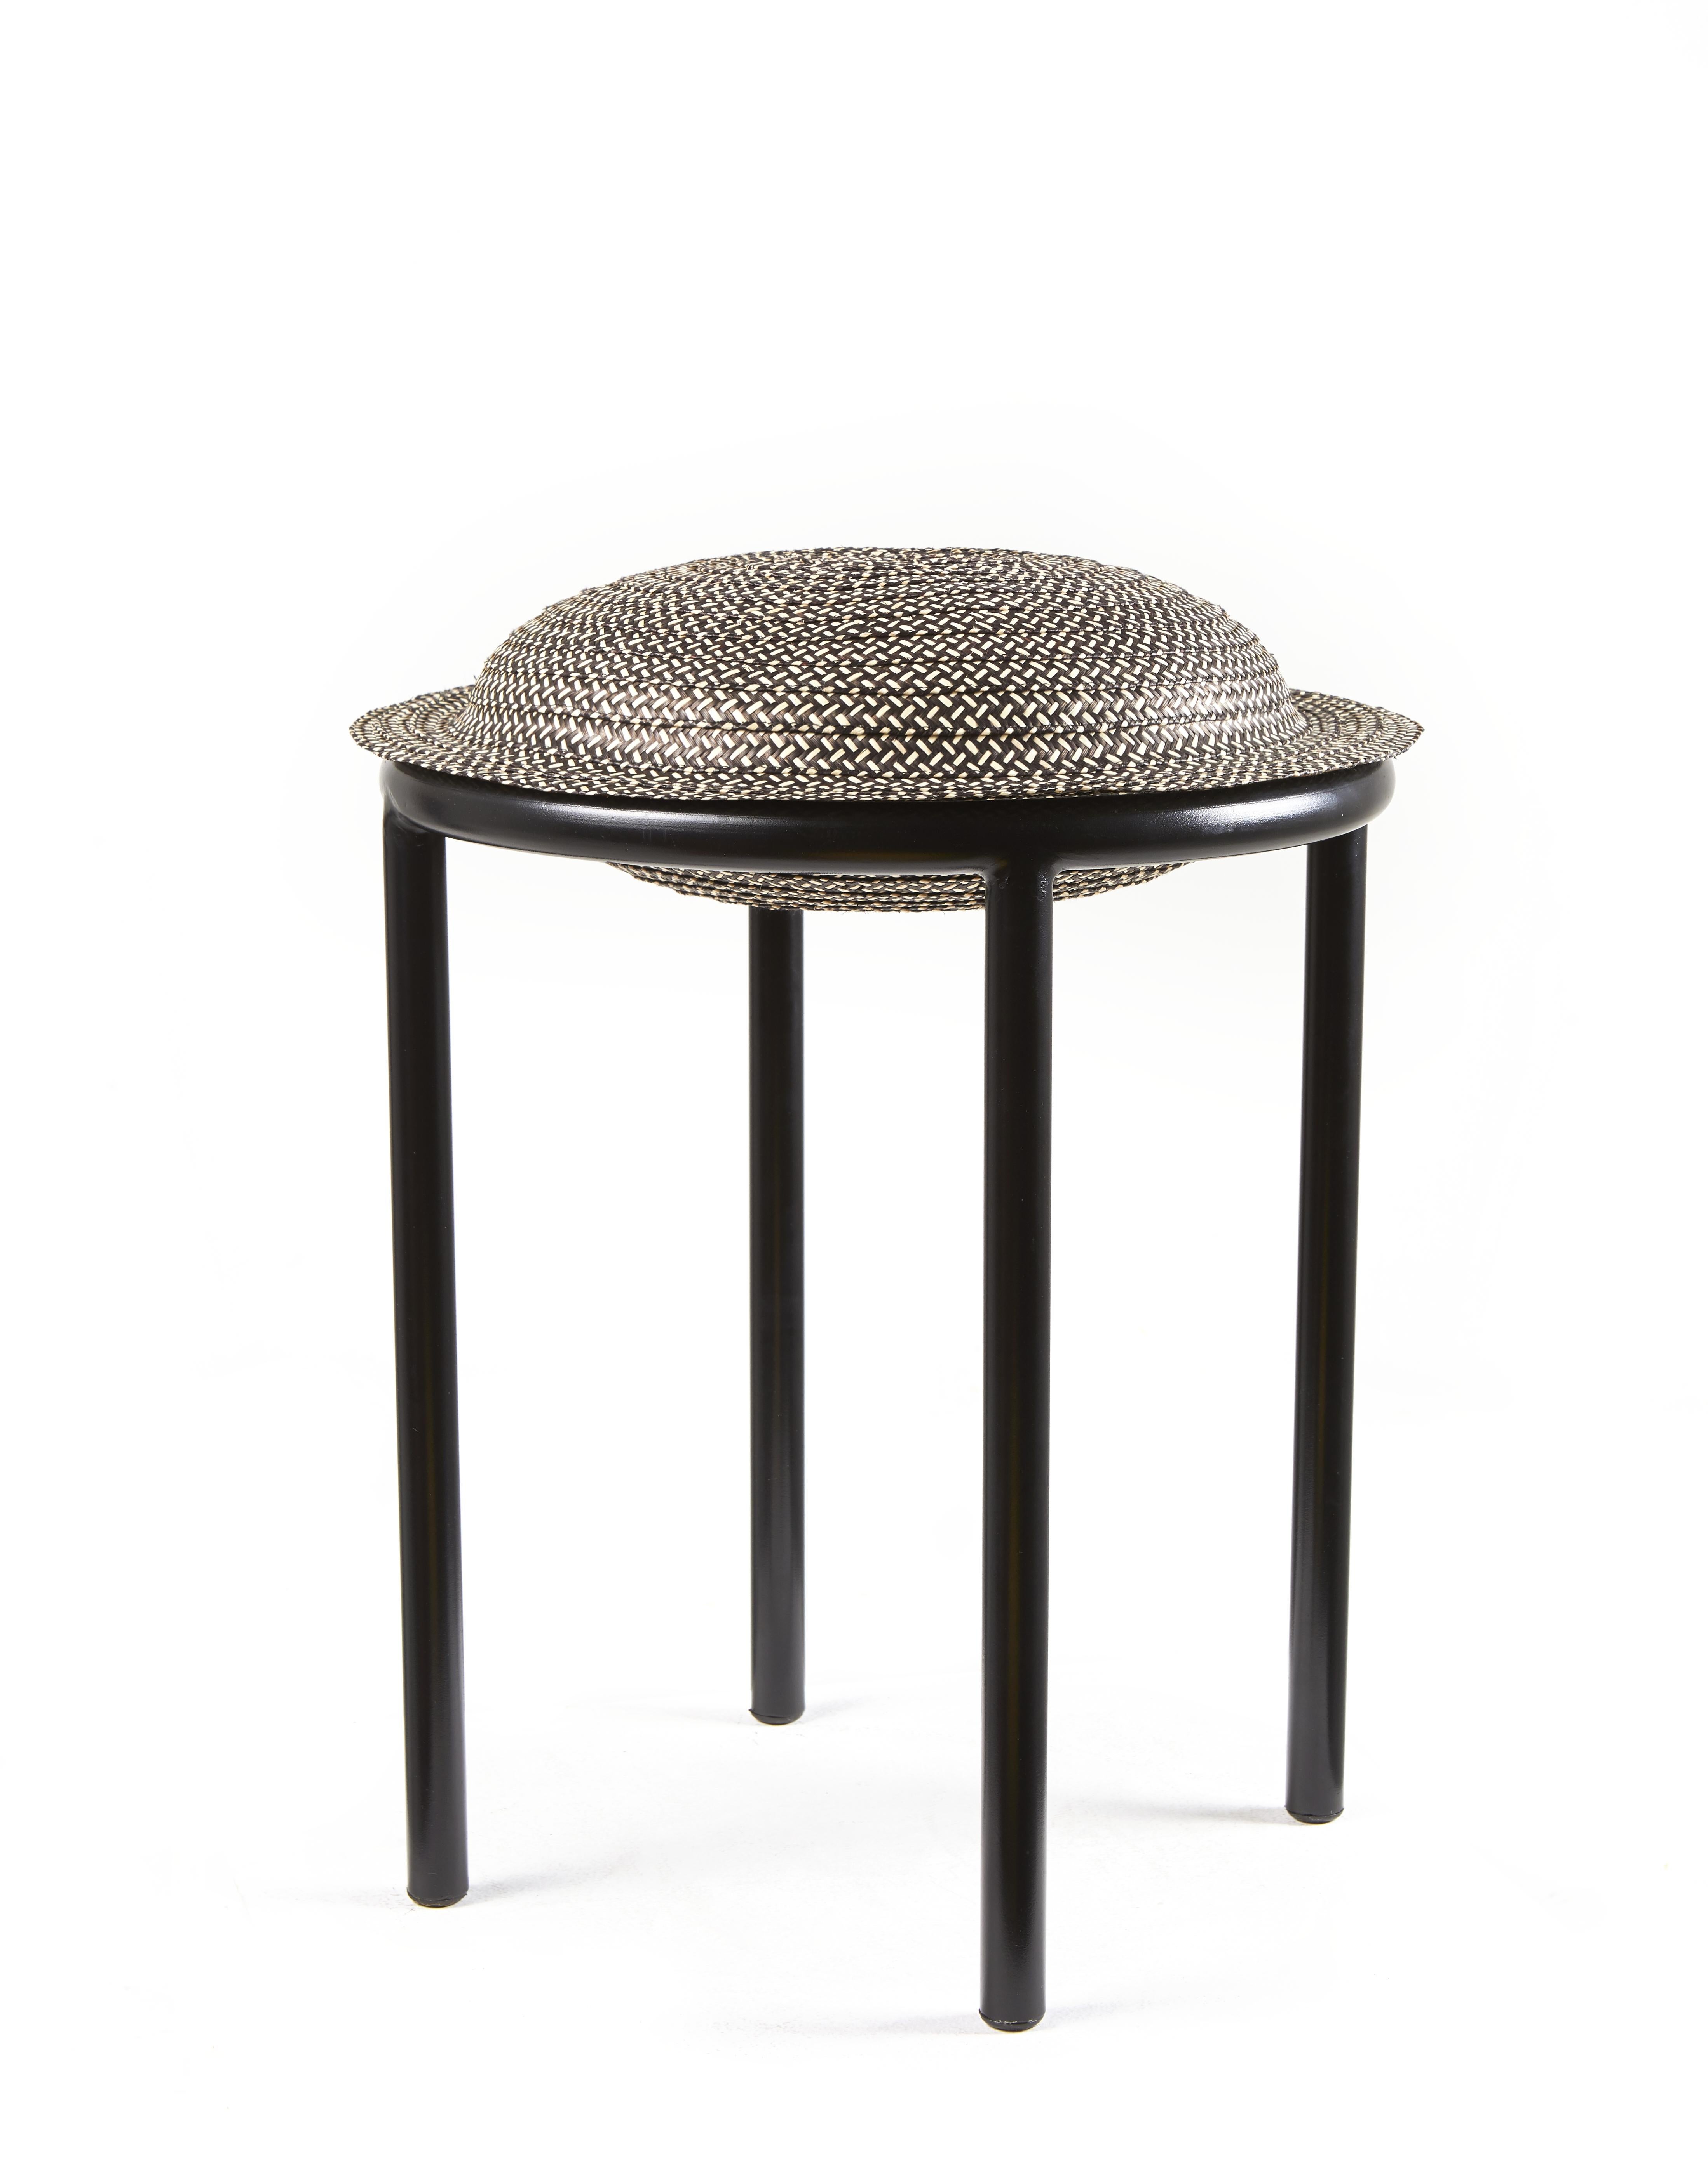 Set of 4 black cana stool by Pauline Deltour by Cristina Celestino.
Materials: Galvanized and powder-coated tubular steel. Caña Flecha.
Technique: Hand-woven with natural fibers in Colombia. Natural dyed. 
Dimensions: Diameter 40.2 x height 48.1